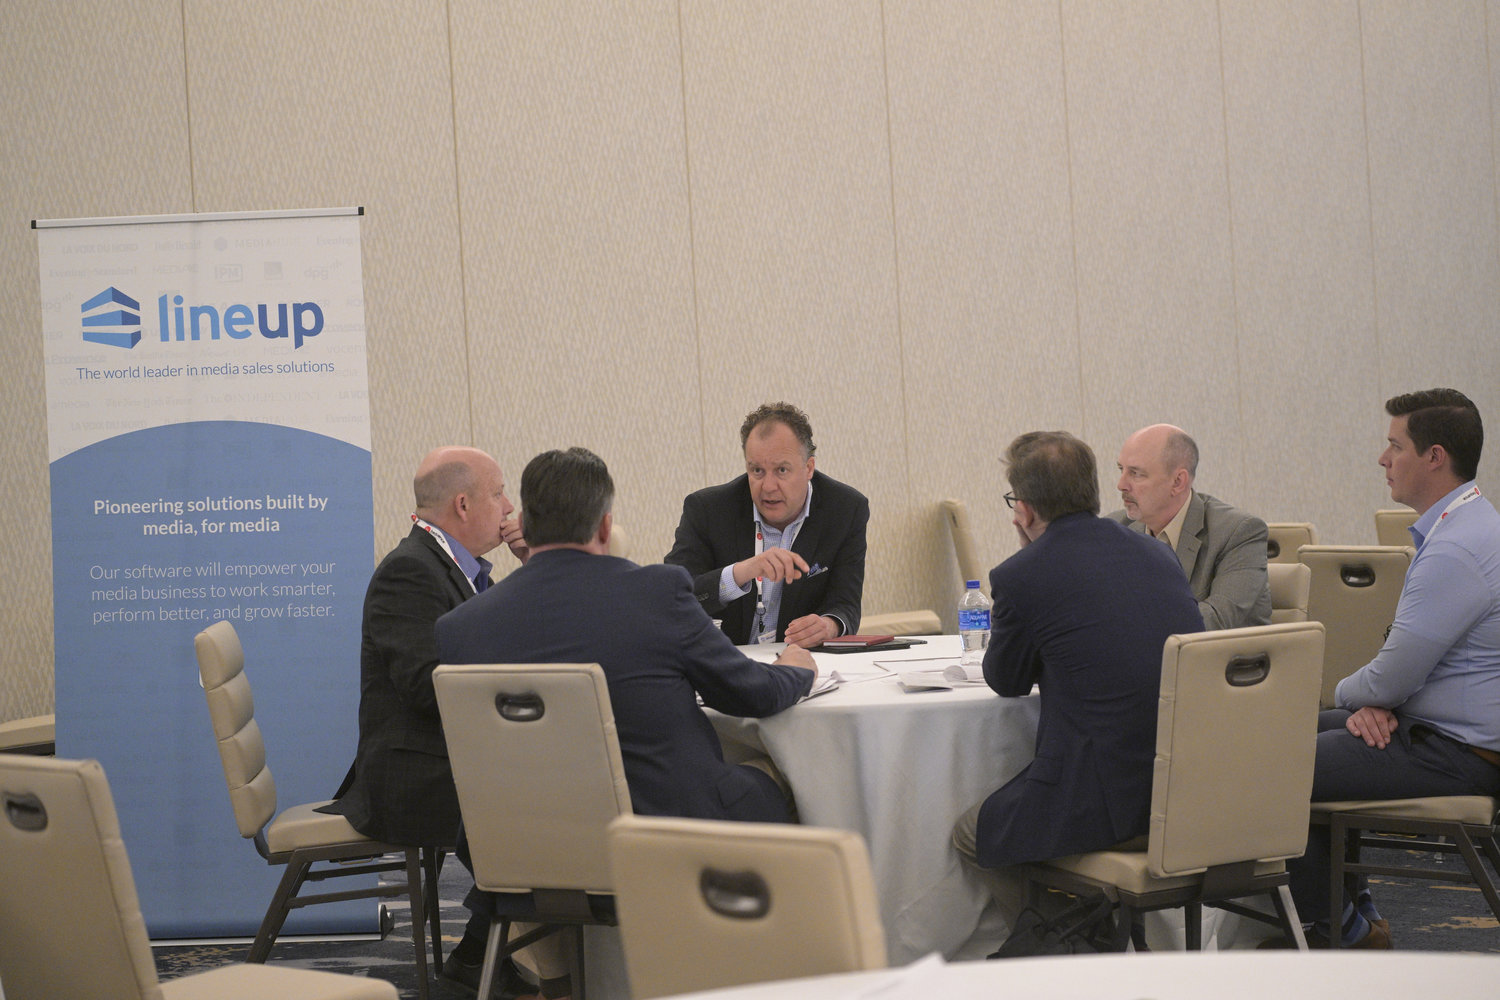 At its Roundtable, Lineup shared information about how it delivers ERP, sales and subscription management solutions to help media companies solve operational challenges and identify revenue opportunities. (Photo by Phelan M. Ebenhack)